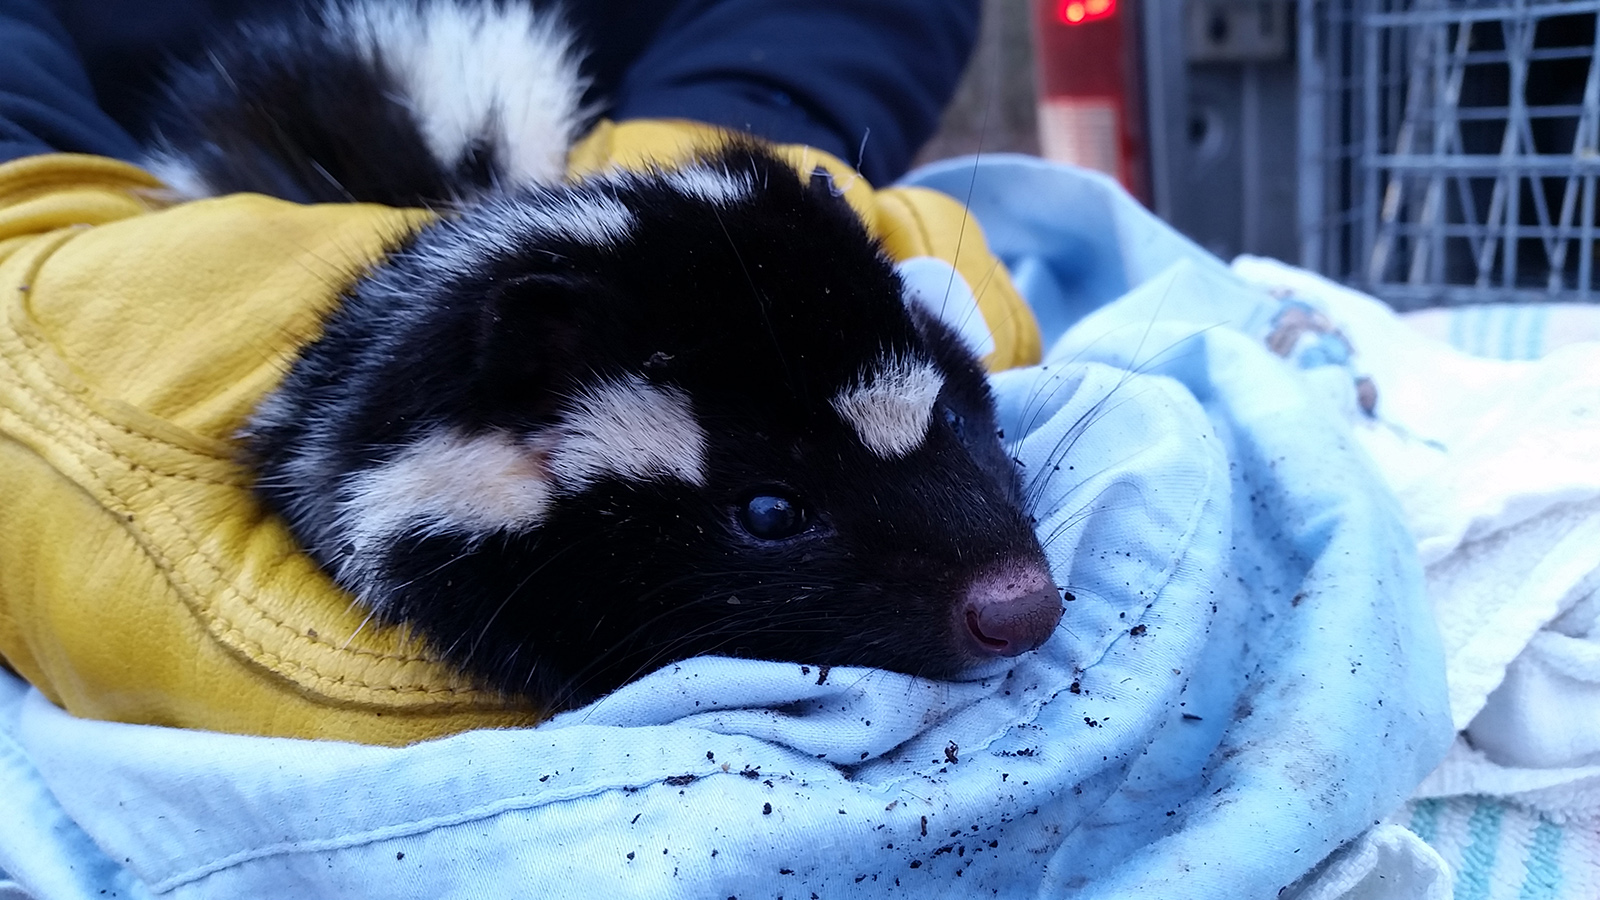 An Eastern spotted skunk. Photo from Virginia Tech